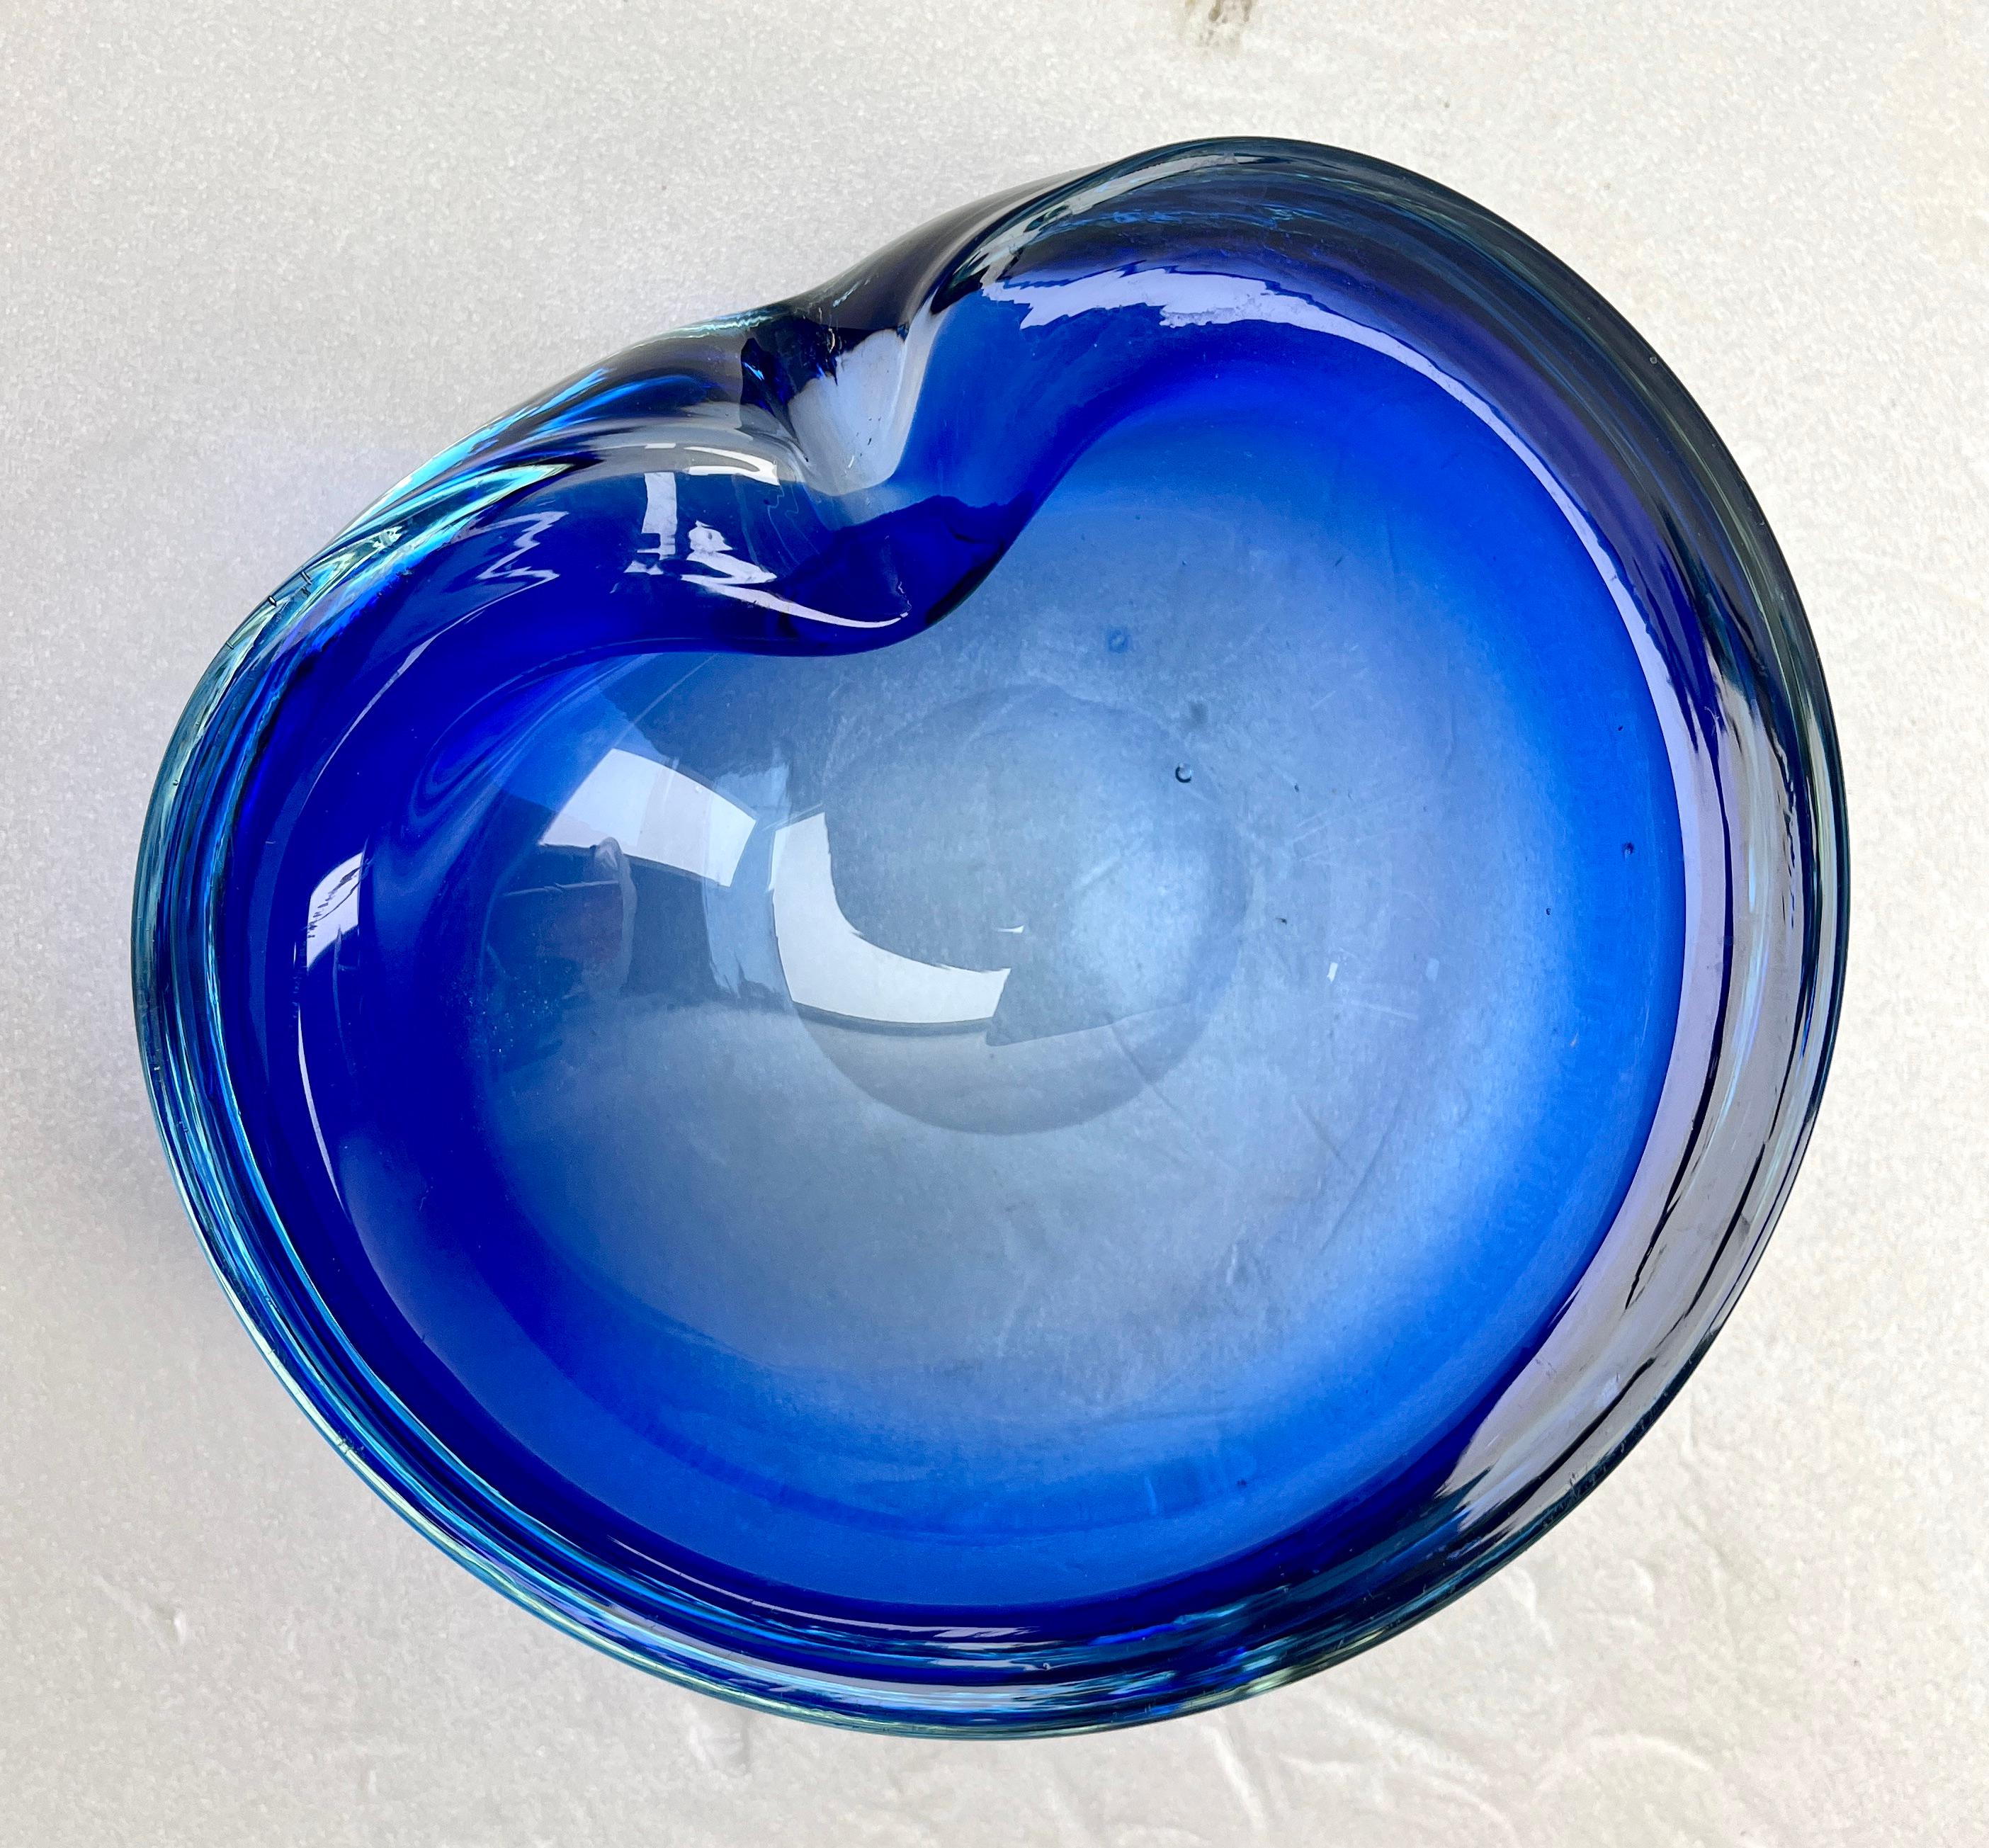 Mid-20th Century Murano Glass Cobalt Bowl Attributed to Flavio Poli for Somerso For Sale